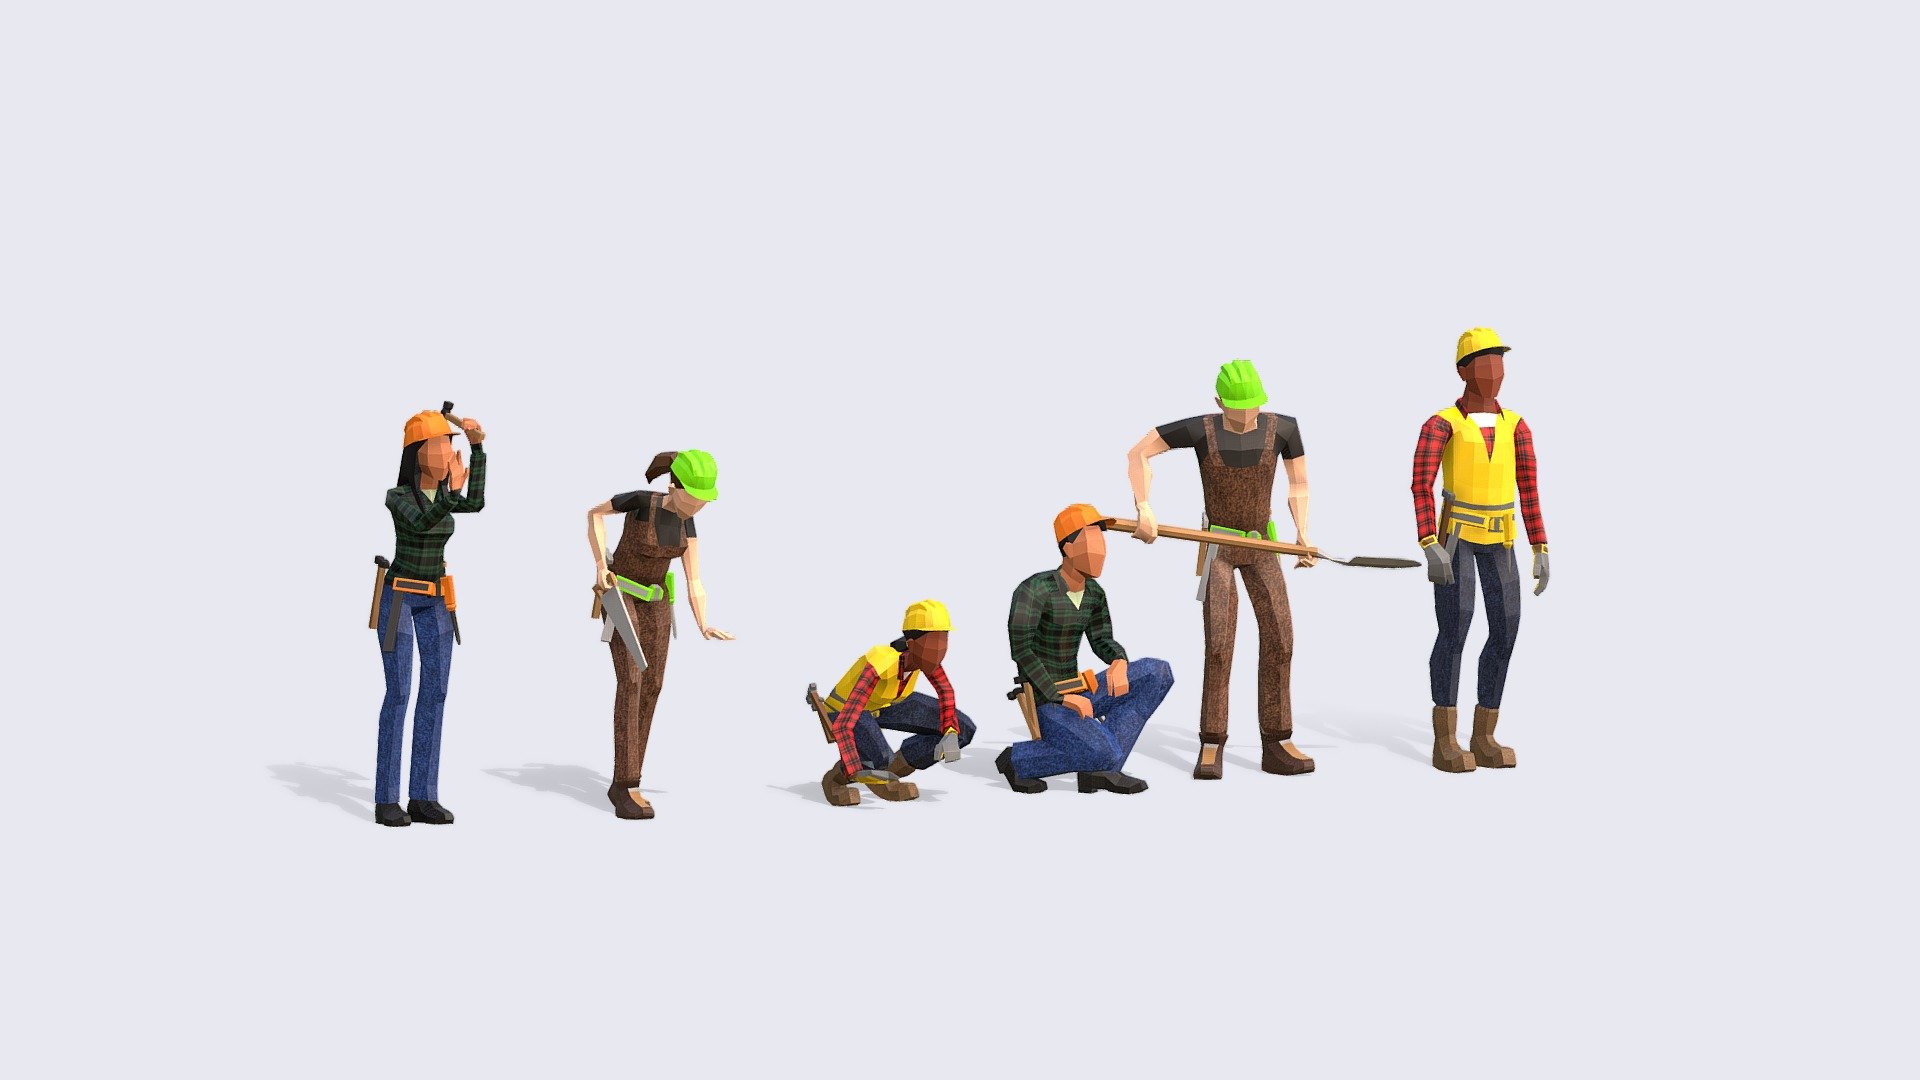 CONSTRUCTION LOW POLY PEOPLE
A super versatile pack of Low Poly People where all models interact. Plus all models can use the same or vary the 3 different textures.

INCLUDES:




Independent Rest Pose file FBX, perfect for Animating with mixamo or your chosen platform

Independent Animated FBX file that includes all 6 looping animations 100 frames

Full Pack Blender Native file with all characters together.

Textures created for the pack.


Give some unique style to your crowds with our collection of low poly people.
*3RD GENERATION of Animated Low-Poly People and it will be included in The Compilation - Construction People - Animated & Rigged - Buy Royalty Free 3D model by Studio Ochi (@studioochi) 3d model